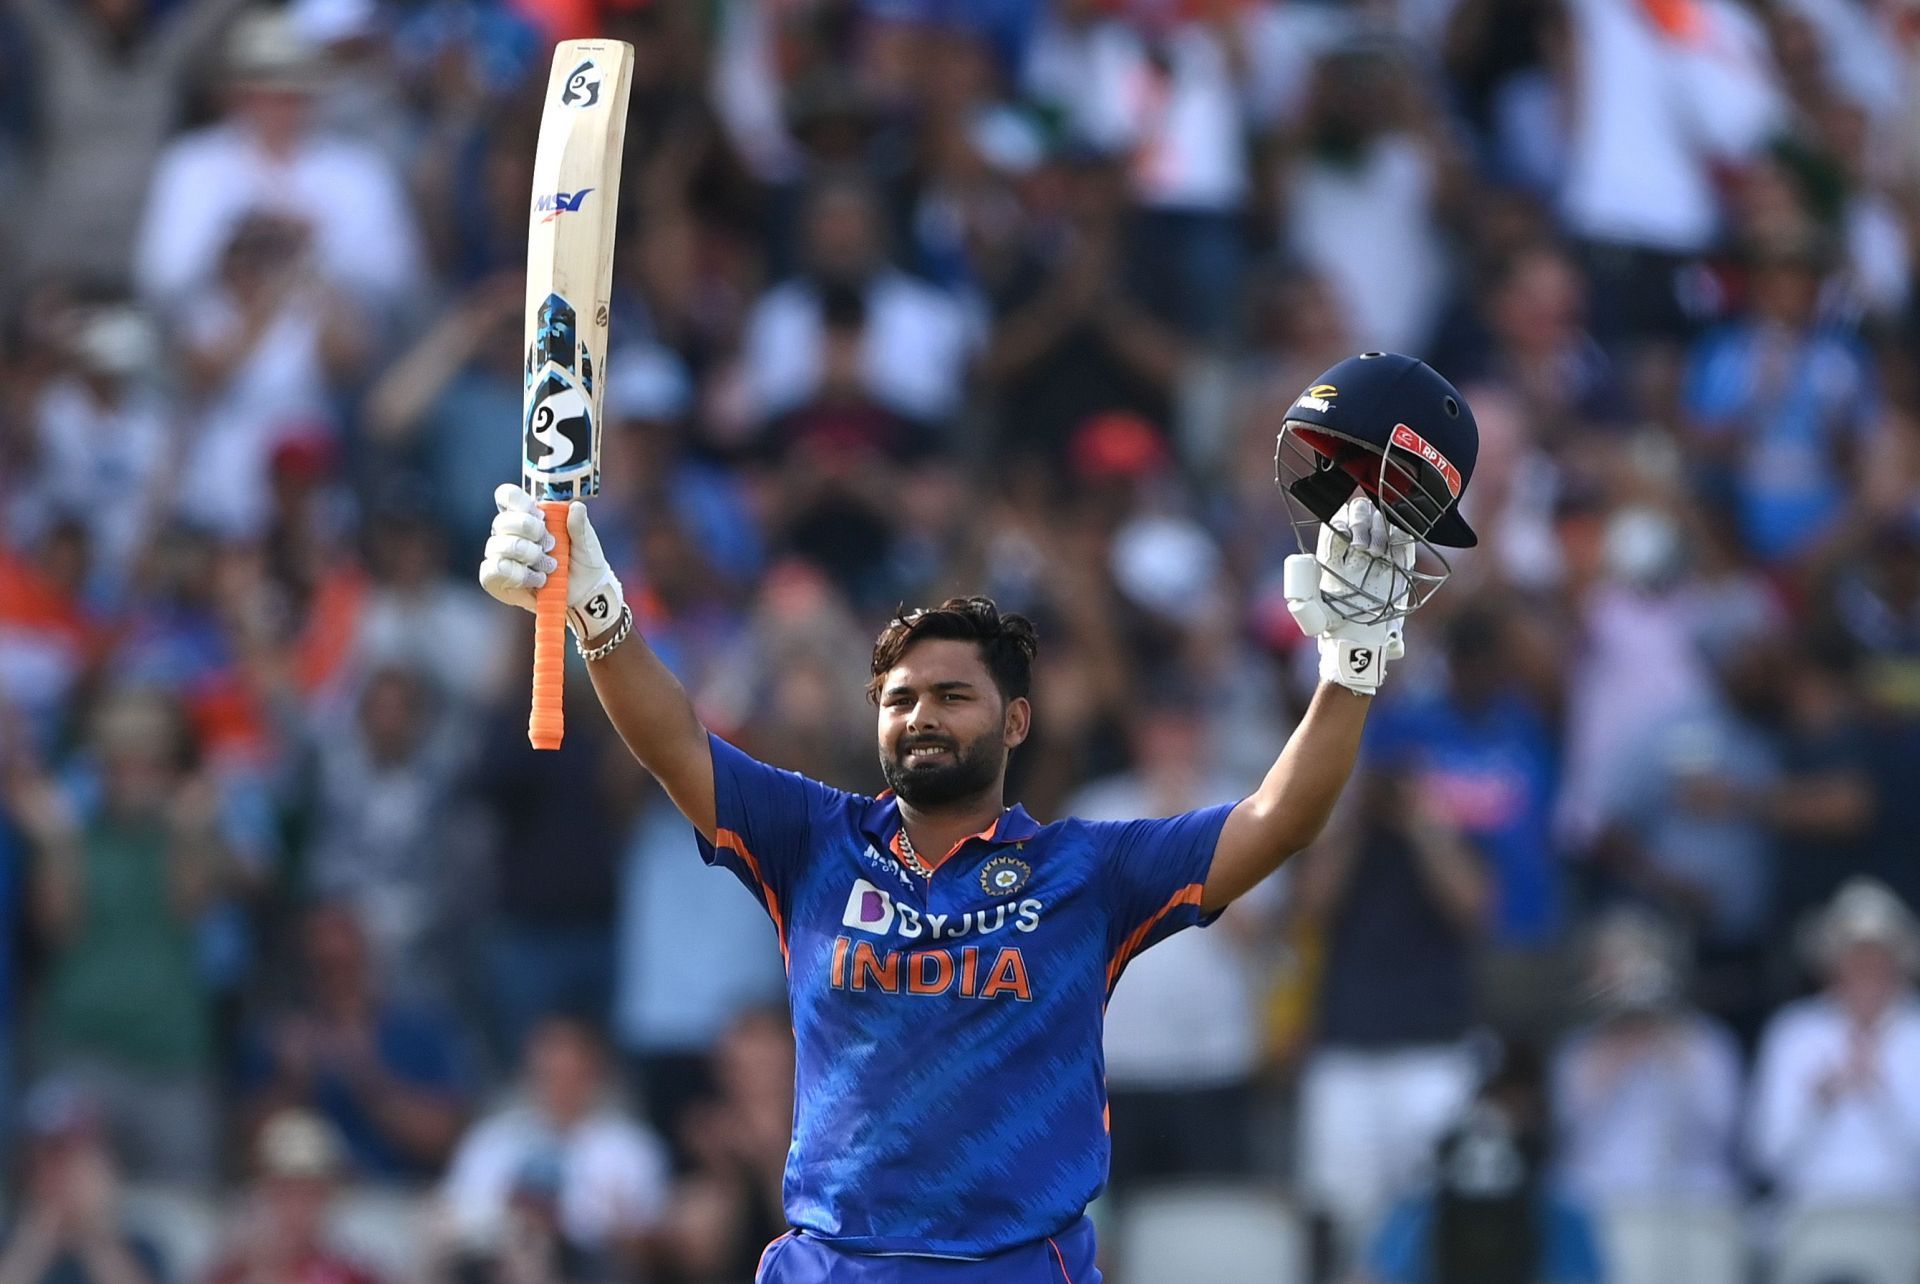 Rishabh Pant produced an innings for the ages at Old Trafford